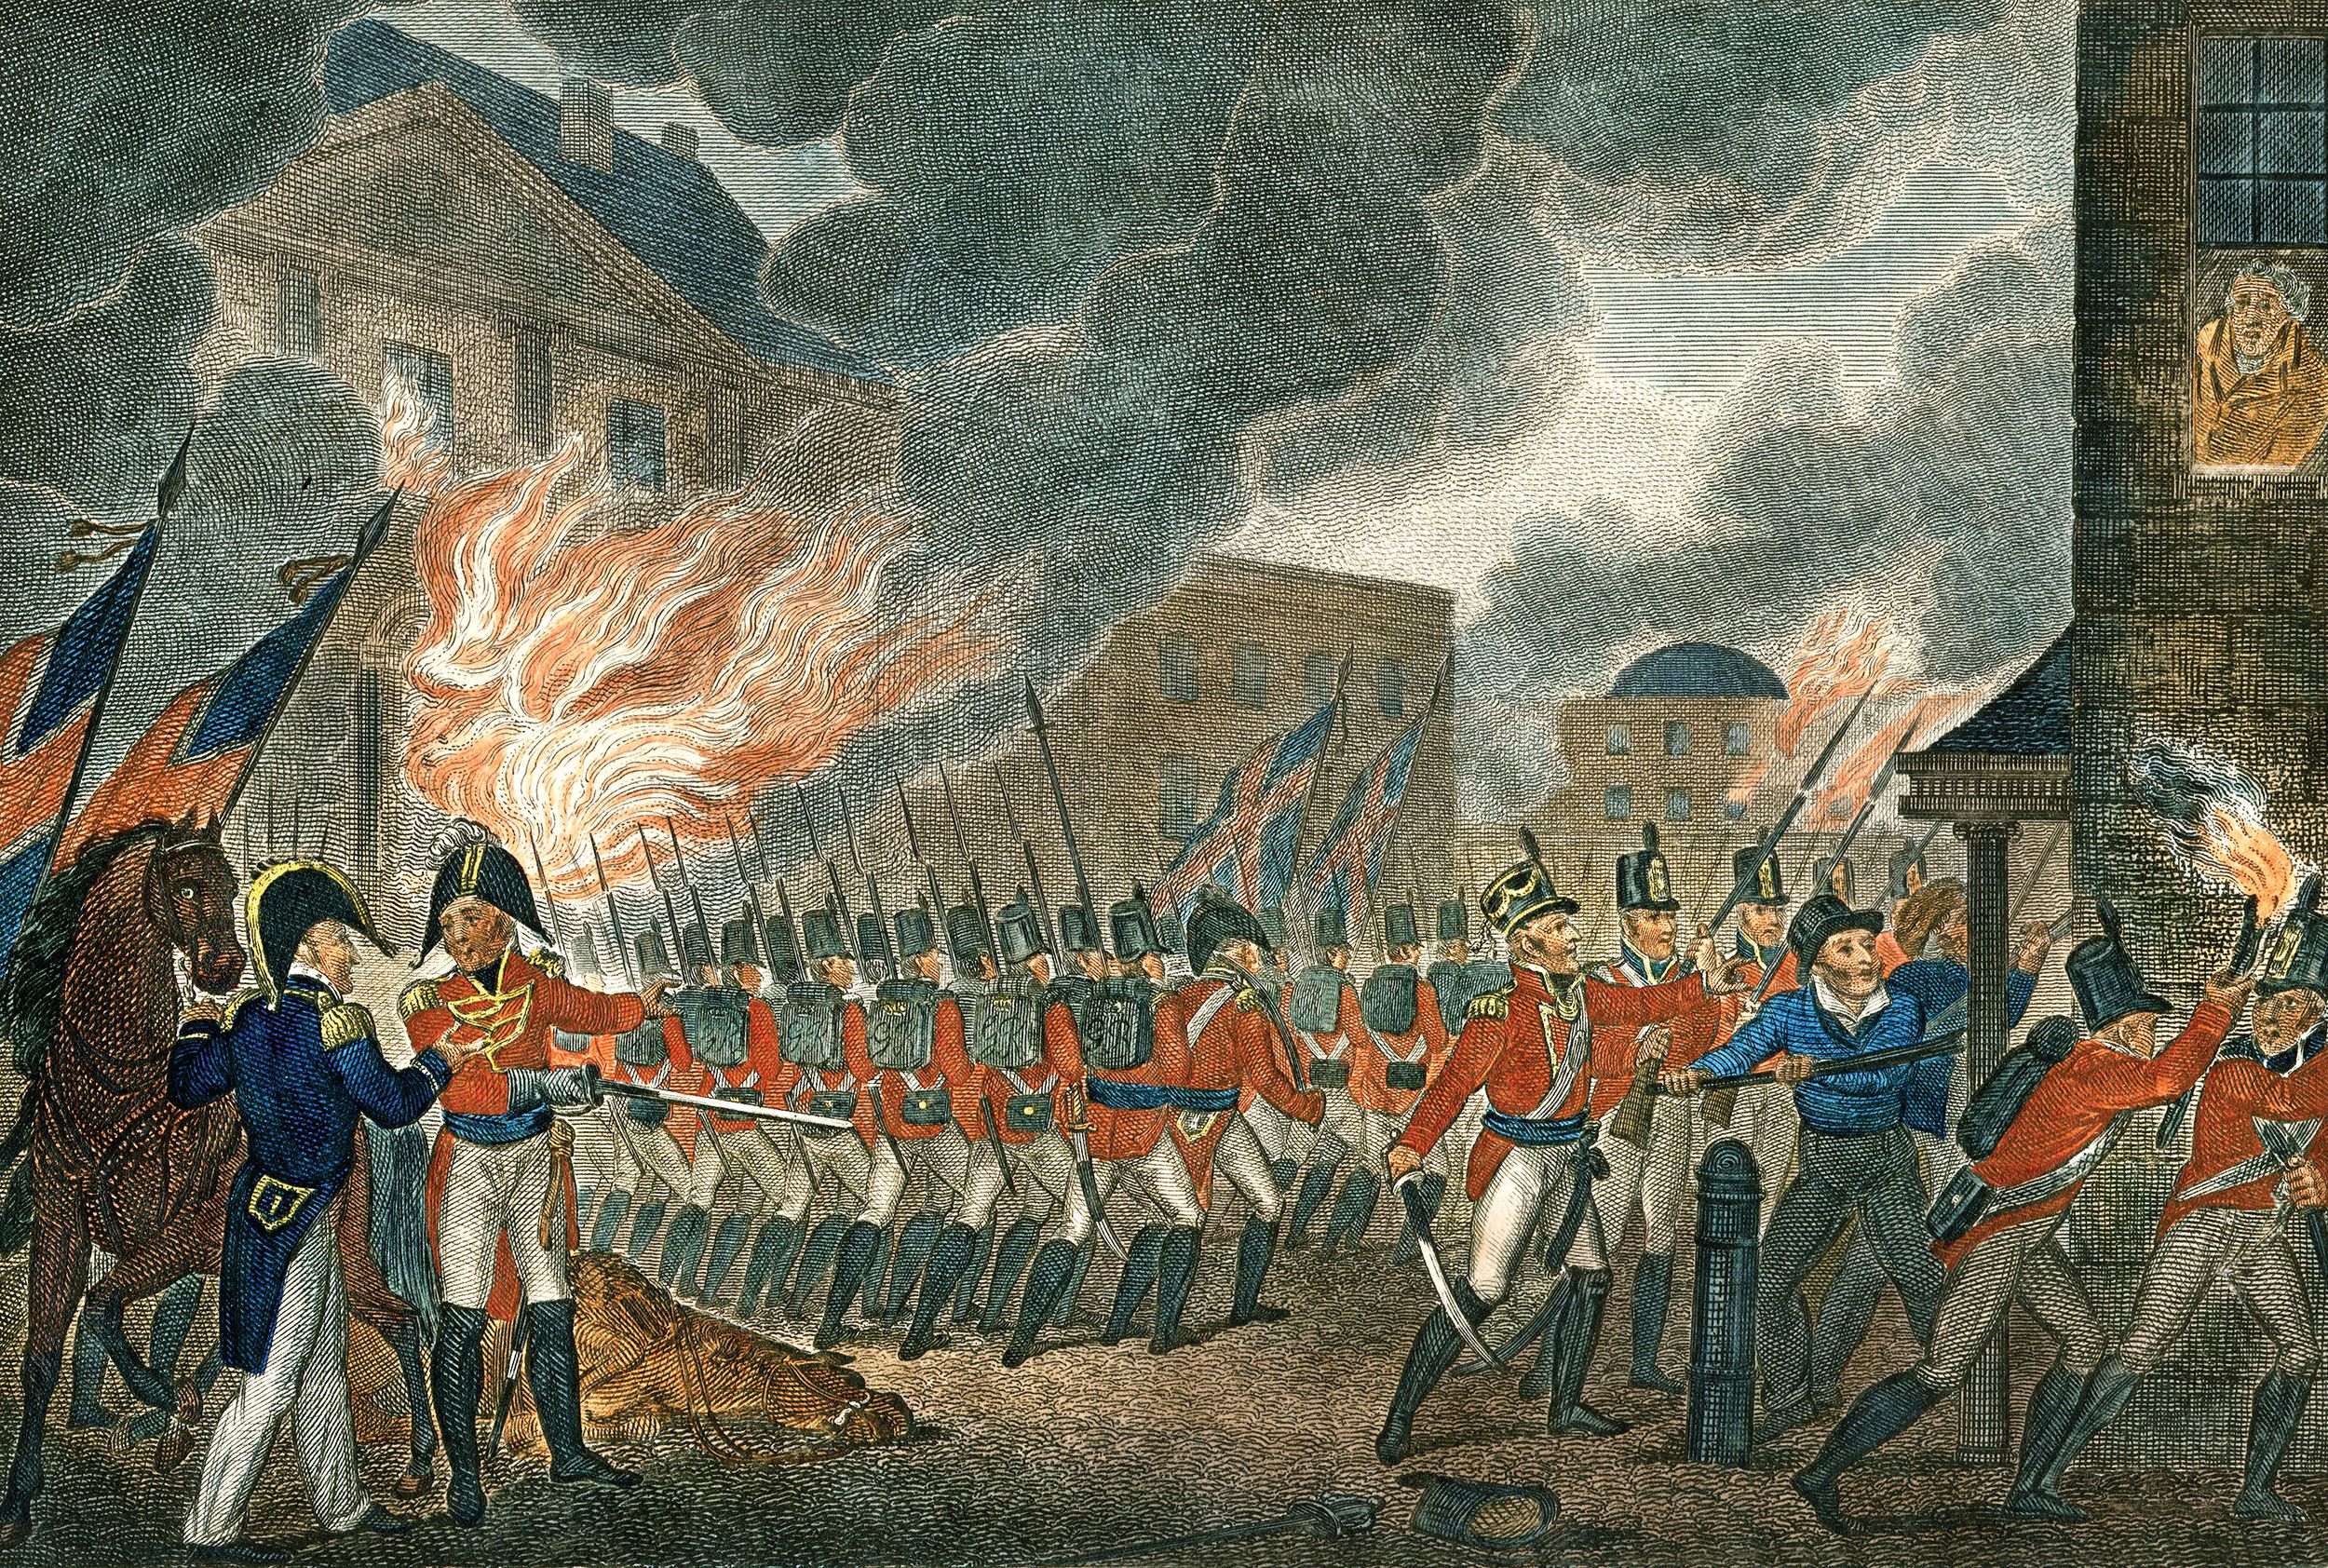 After defeating American forces at the Battle of Bladensburg in nearby Maryland, British troops under Admiral George Cockburn marched on Washington, setting fire to multiple public buildings, including the White House, and the U.S. Capitol.